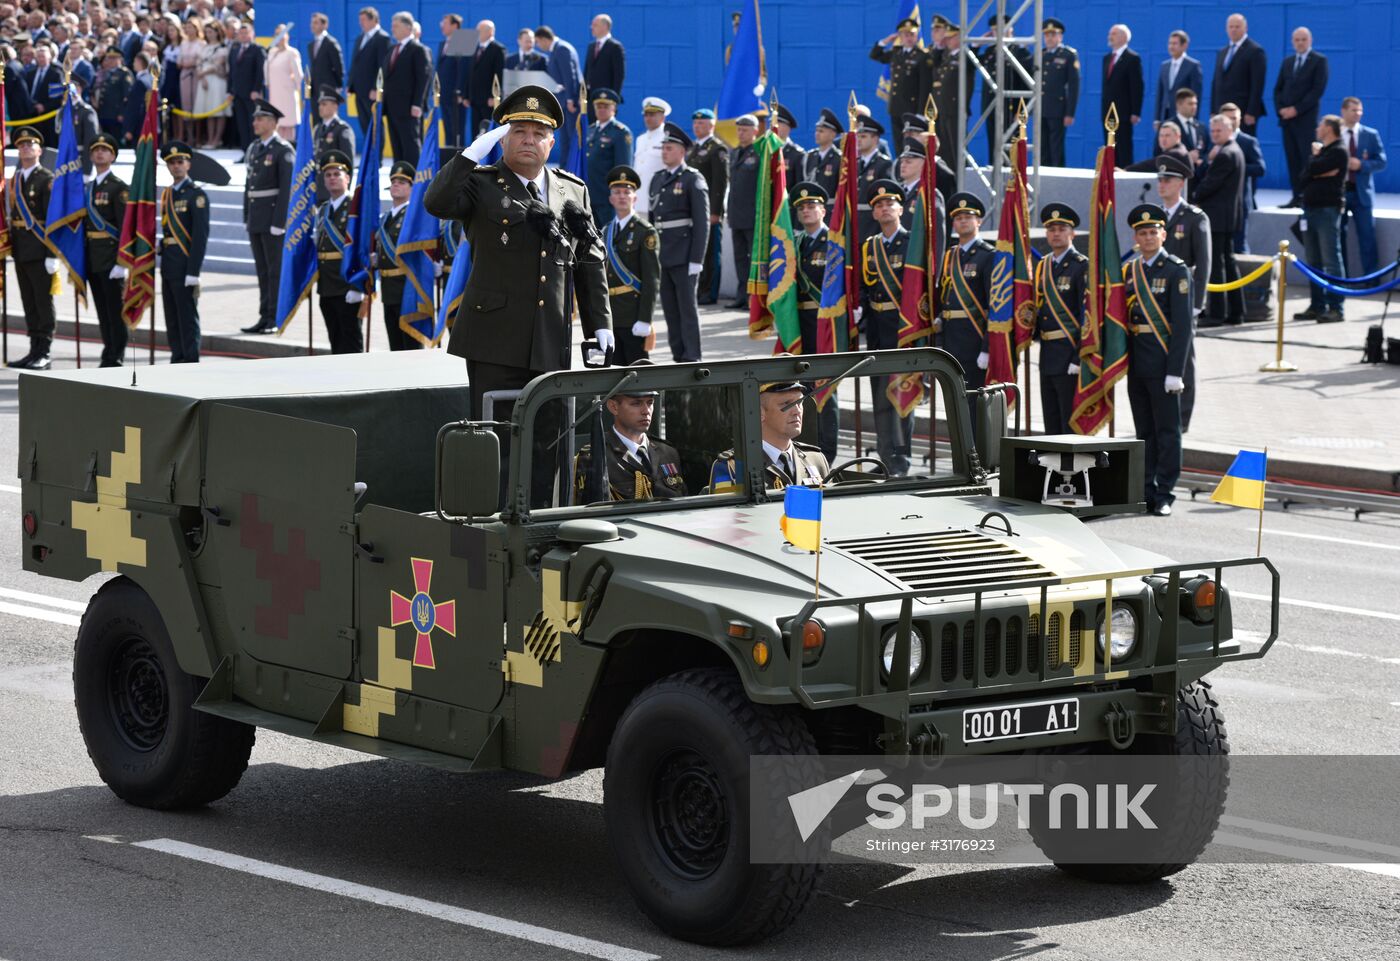 Parade to mark Independence Day in Kiev